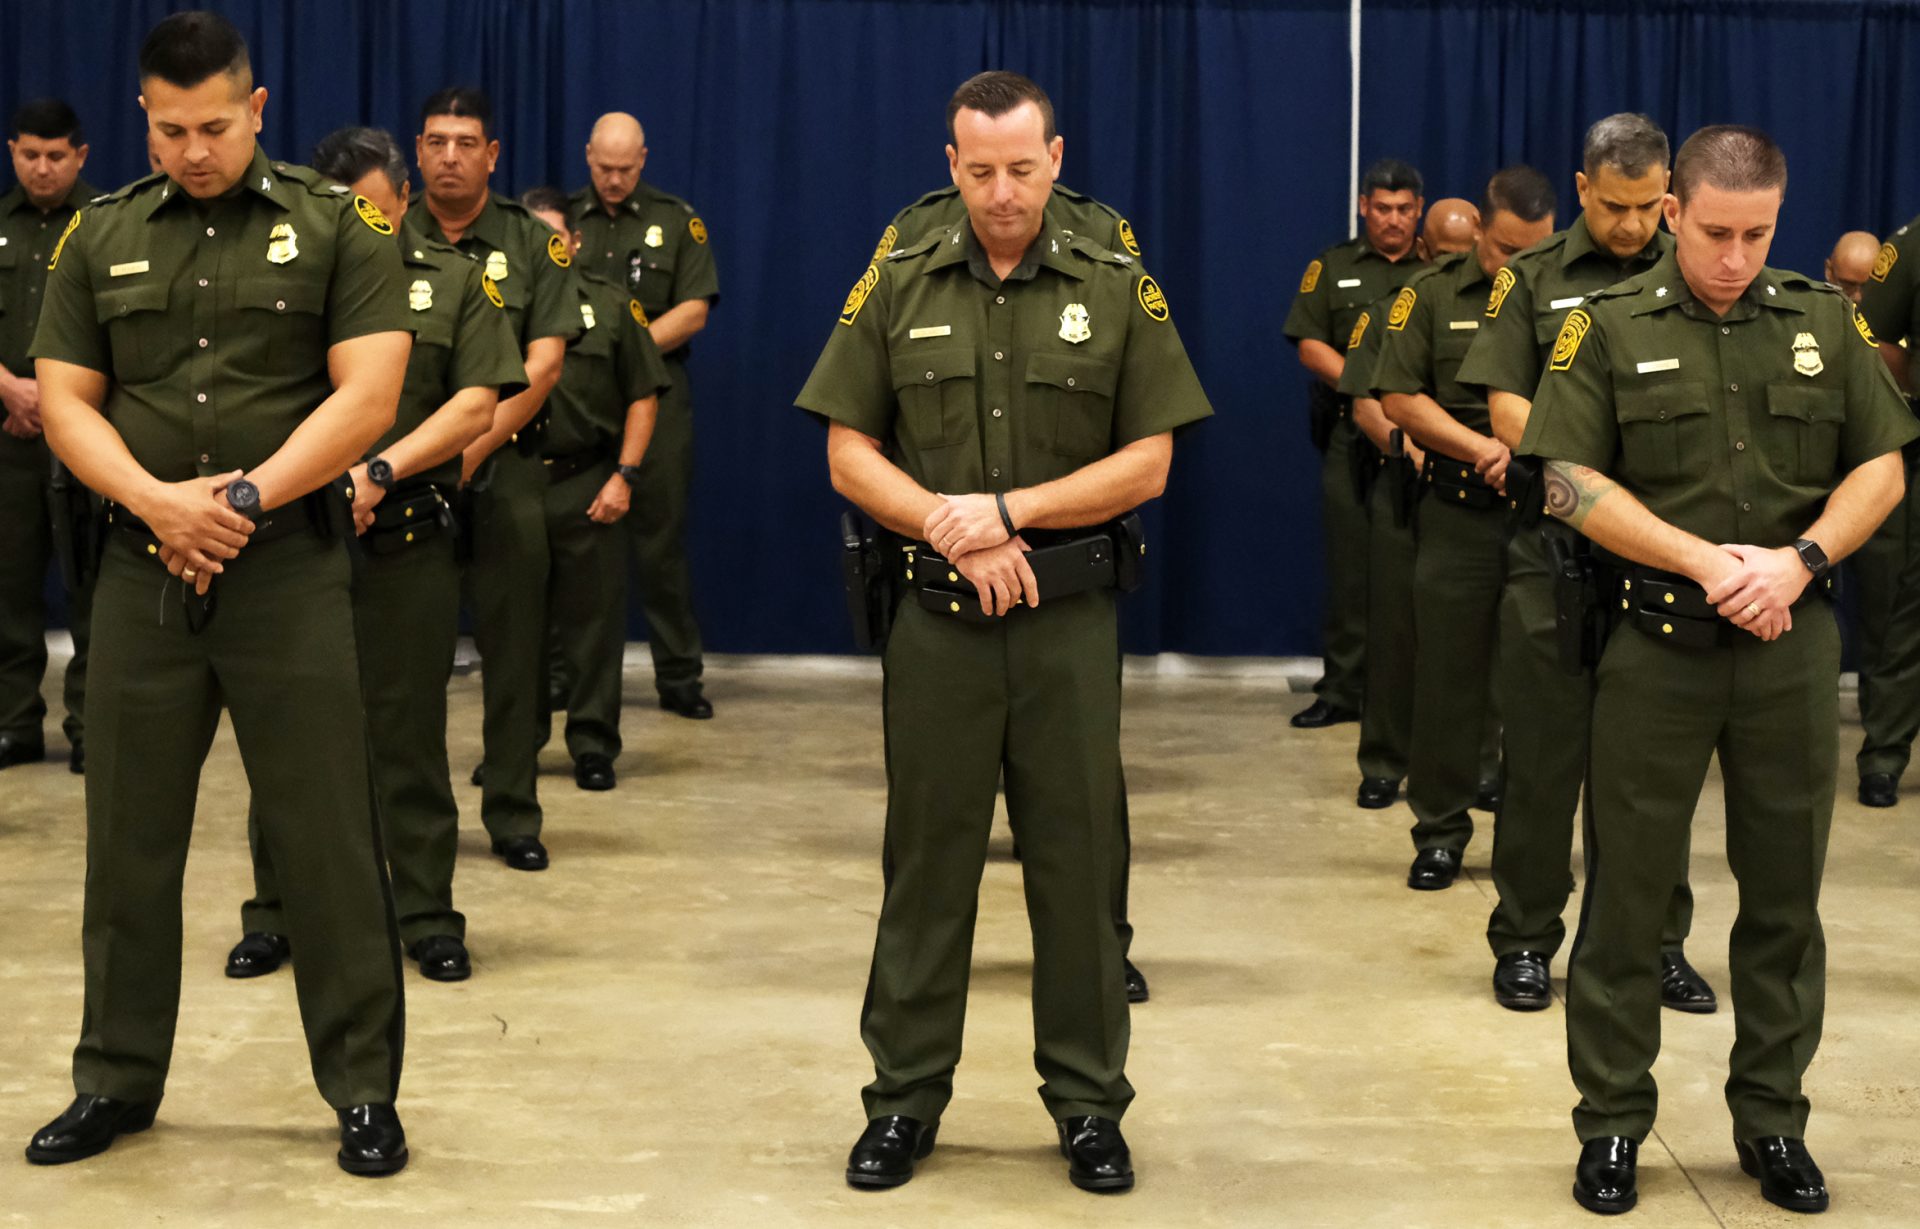 In the Rio Grande Valley, the Border Patrol Is the 'Go-To Job